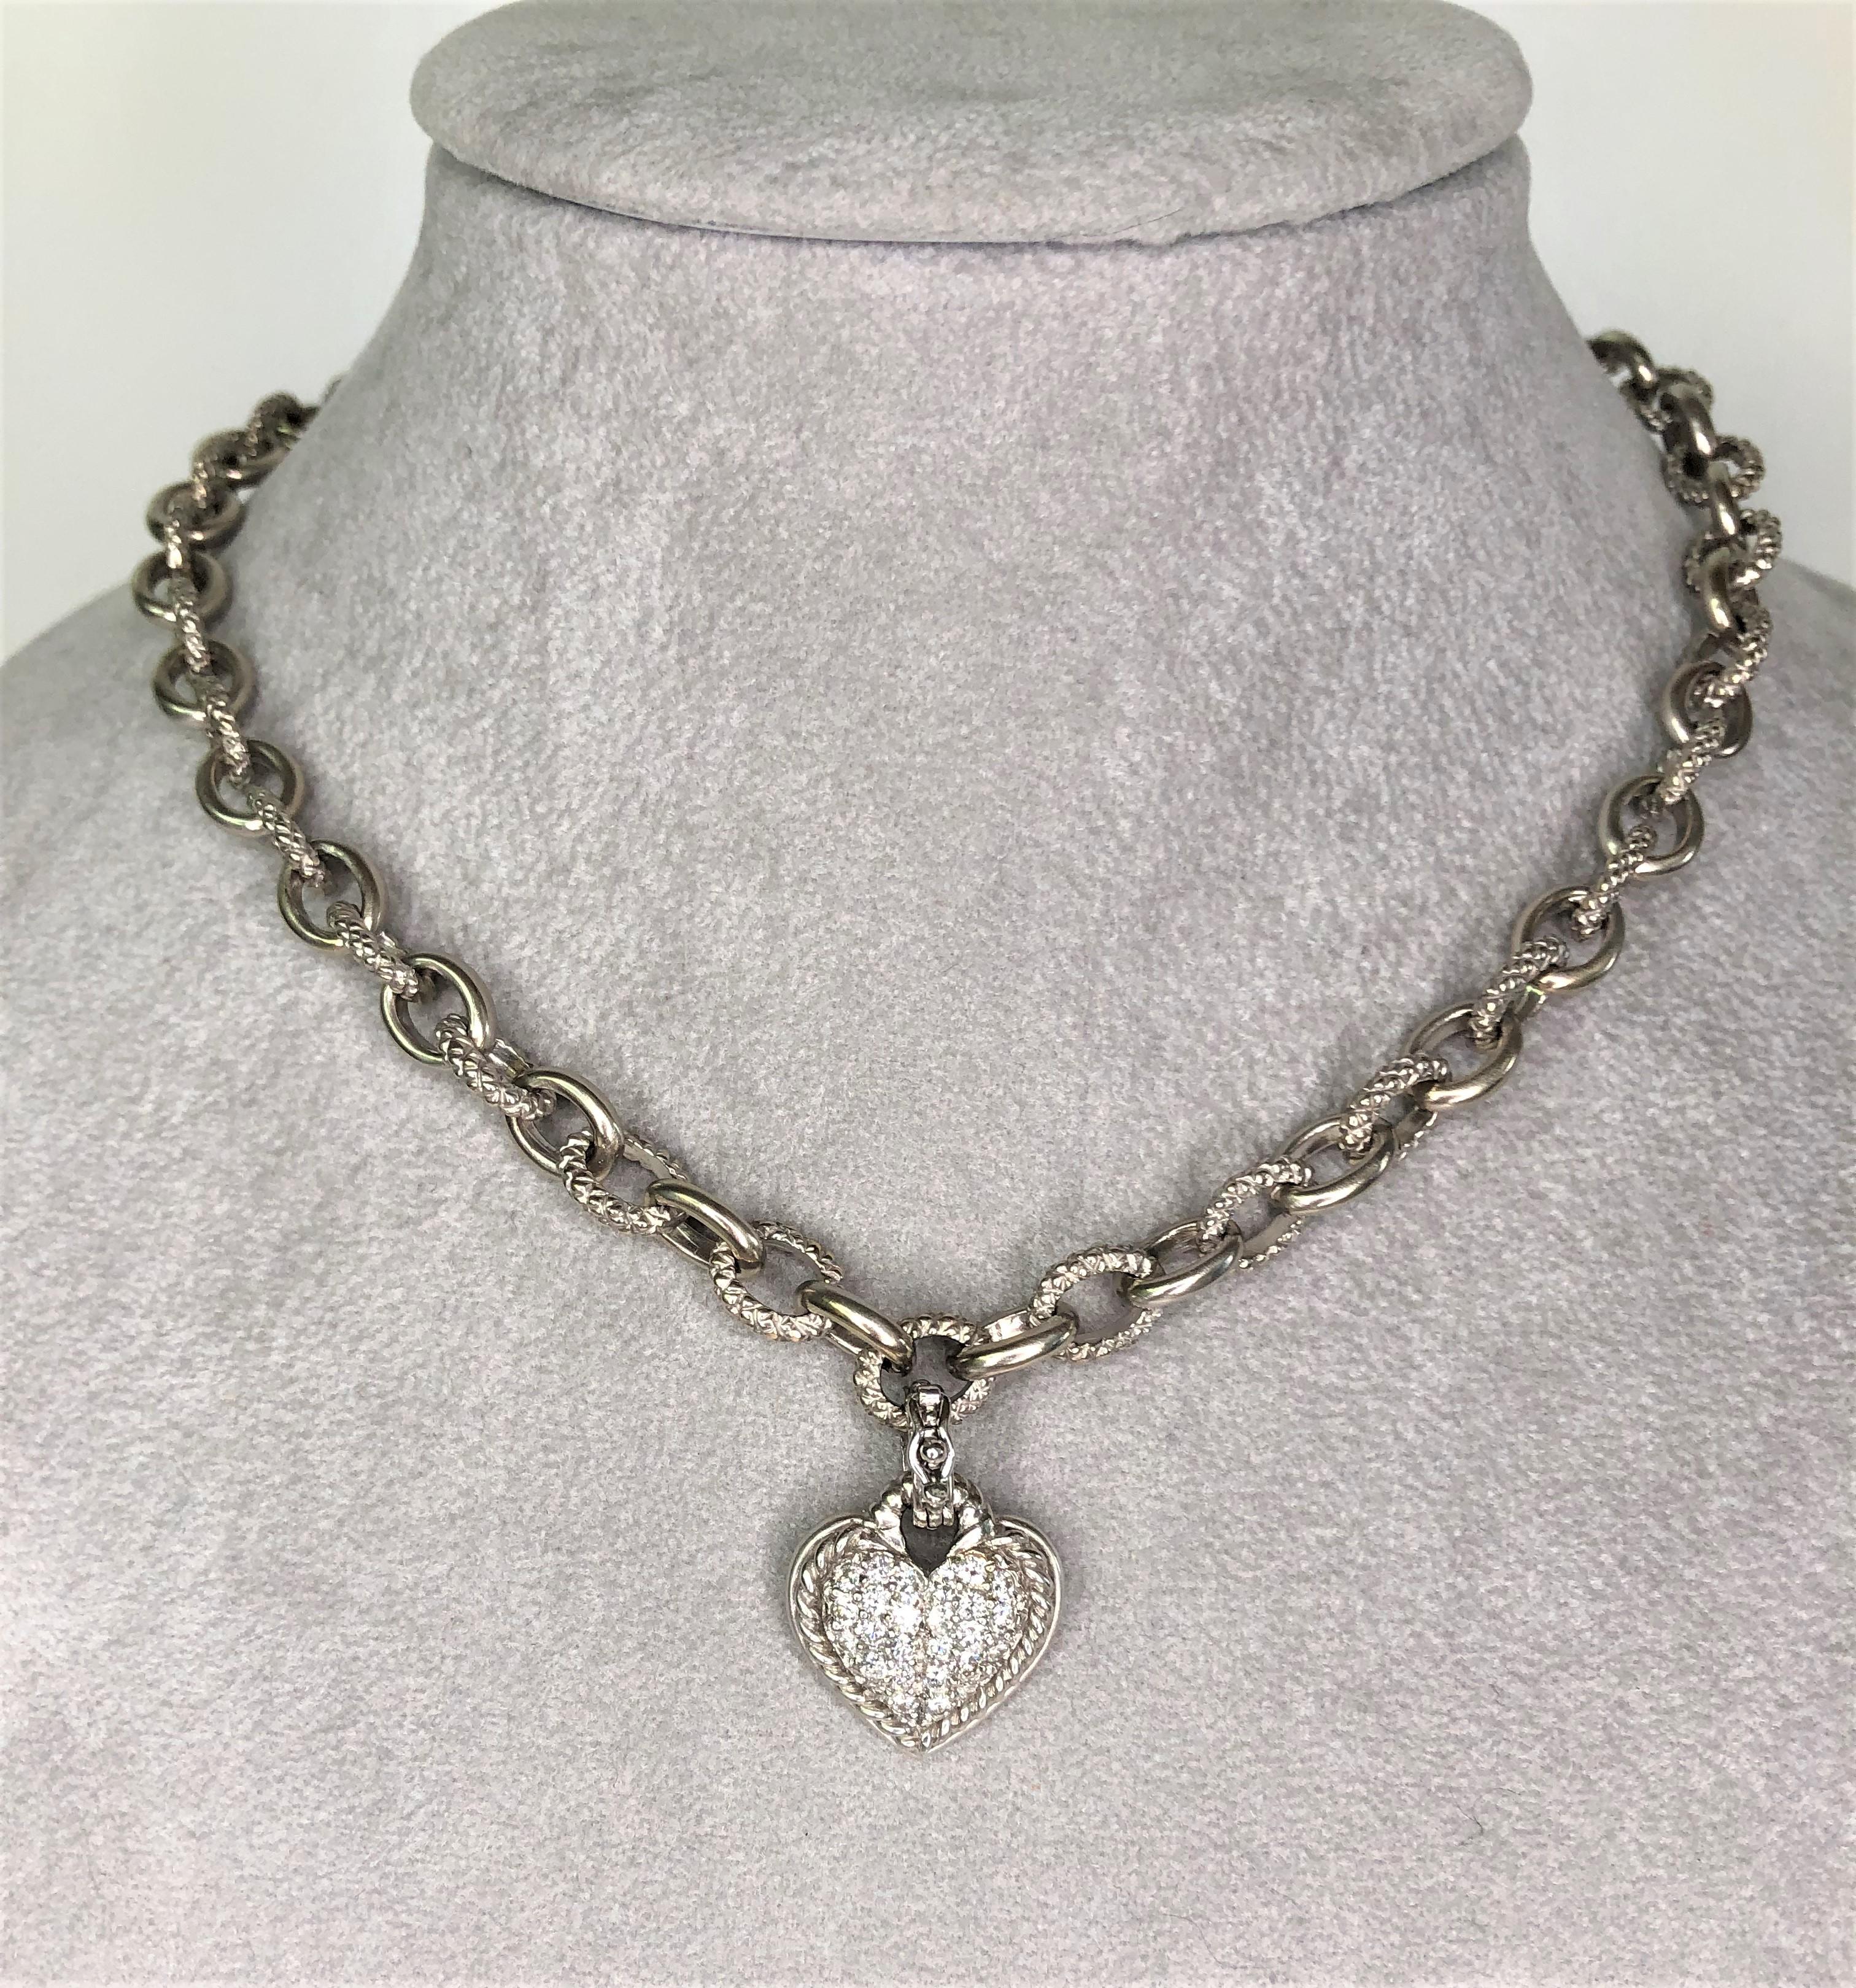 By designer Judith Ripka, this necklace is beautifully crafted and will last the test of time!
A great everyday piece to add to anyone's jewelry collection.
Solid 18 karat white gold.  
8mm cable chain alternates smooth and textured links.
Smaller